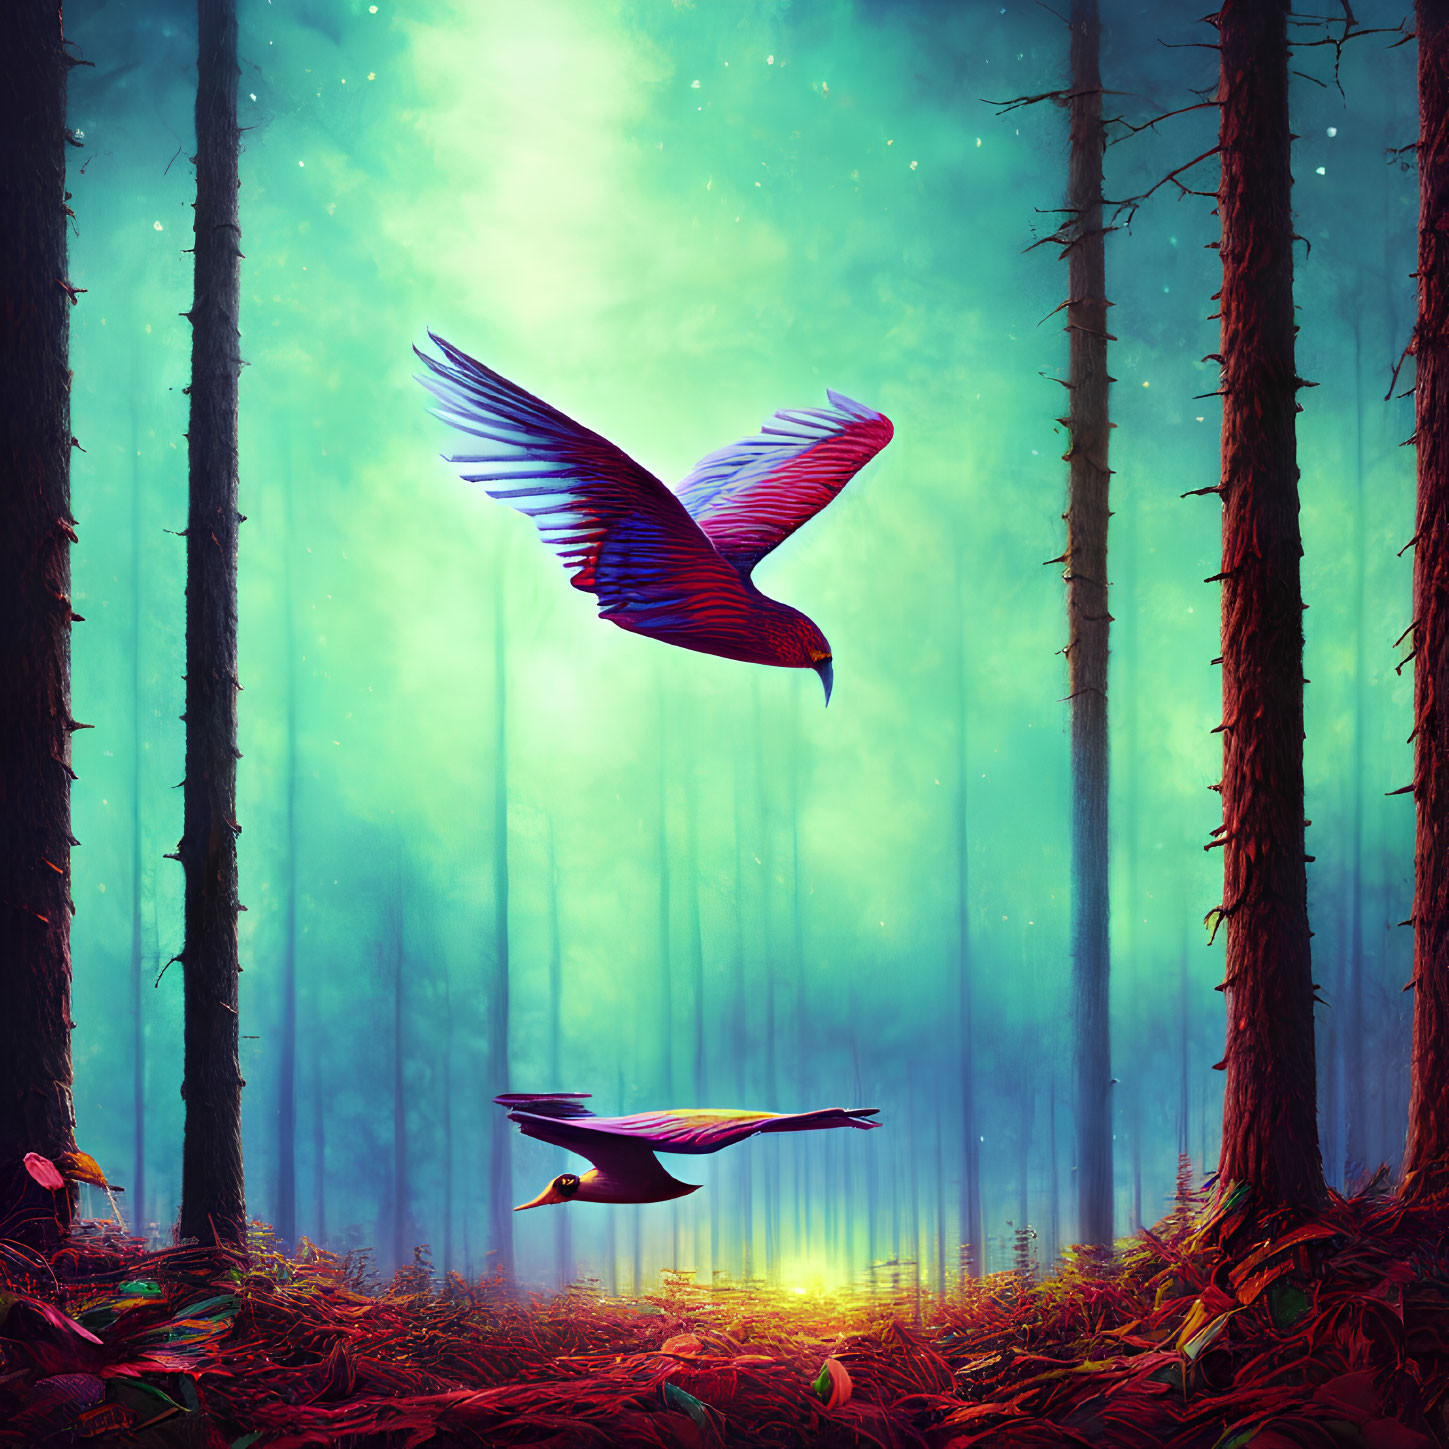 Colorful birds soar in enchanted forest with tall trees and mystical atmosphere.